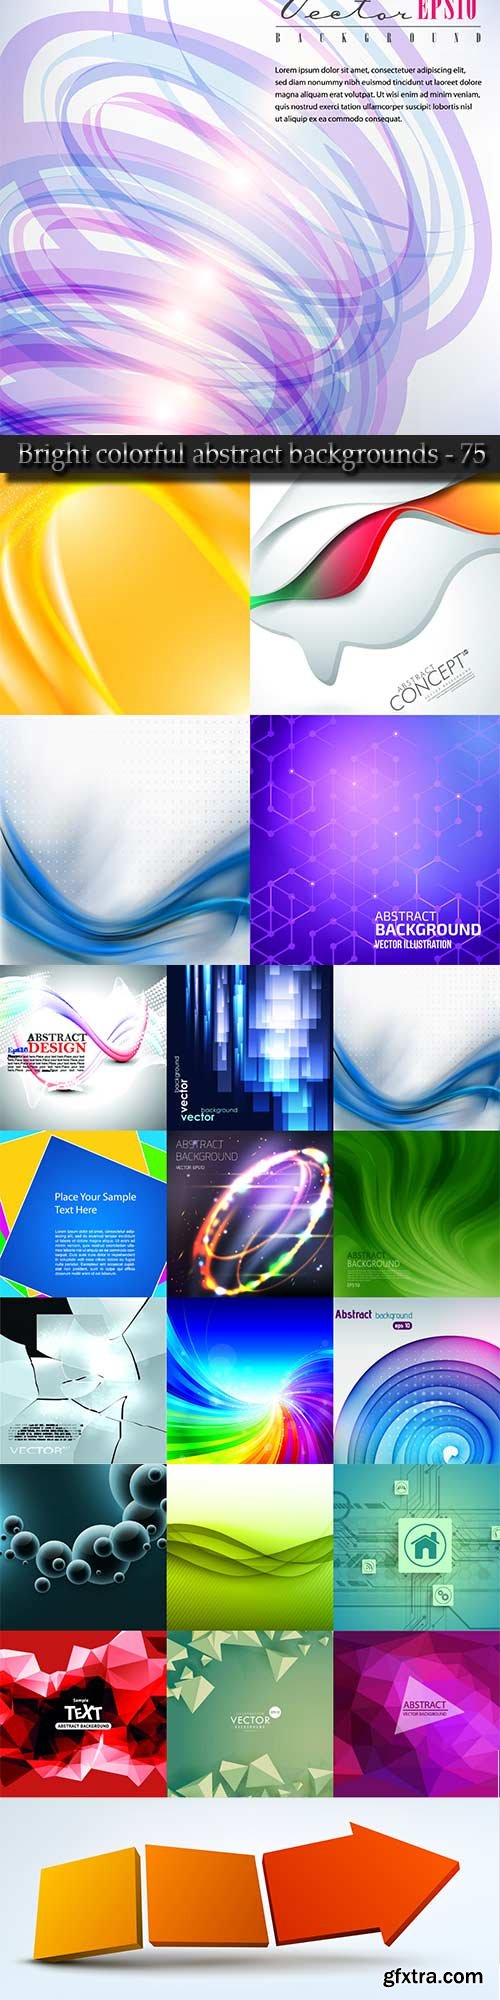 Bright colorful abstract backgrounds vector - 75